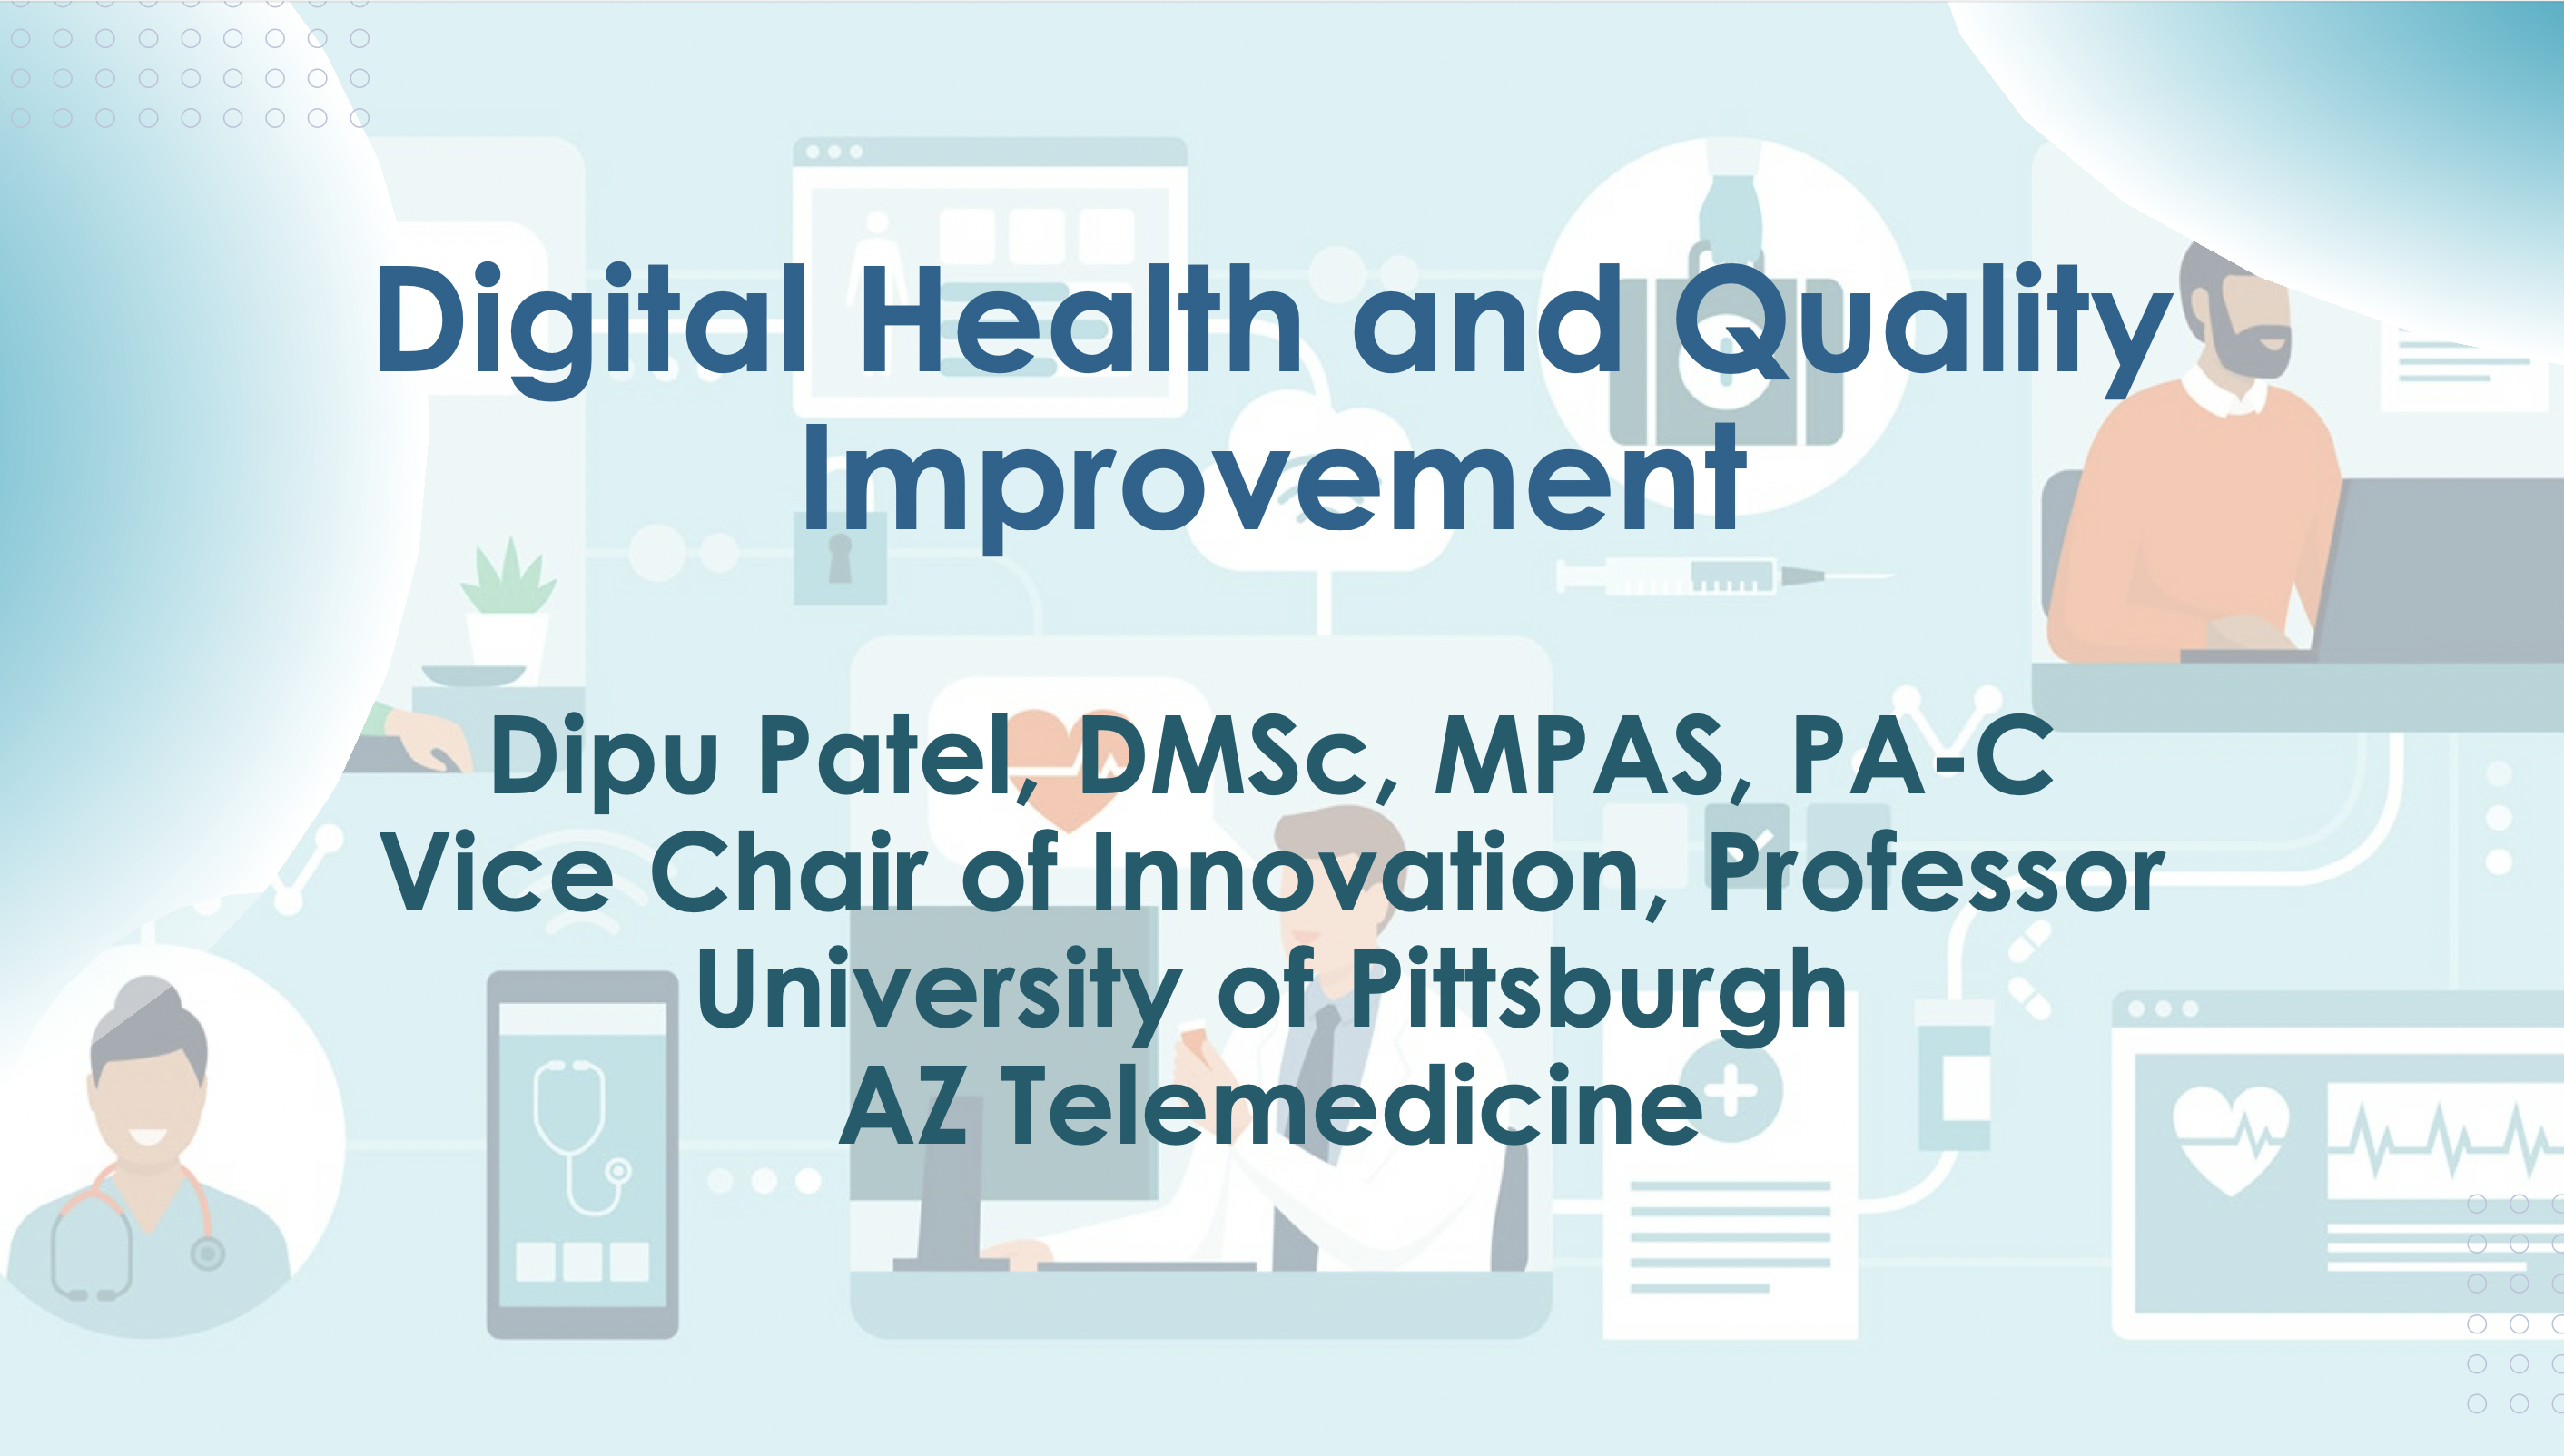 Digital Health and Quality Improvement slide deck with title text